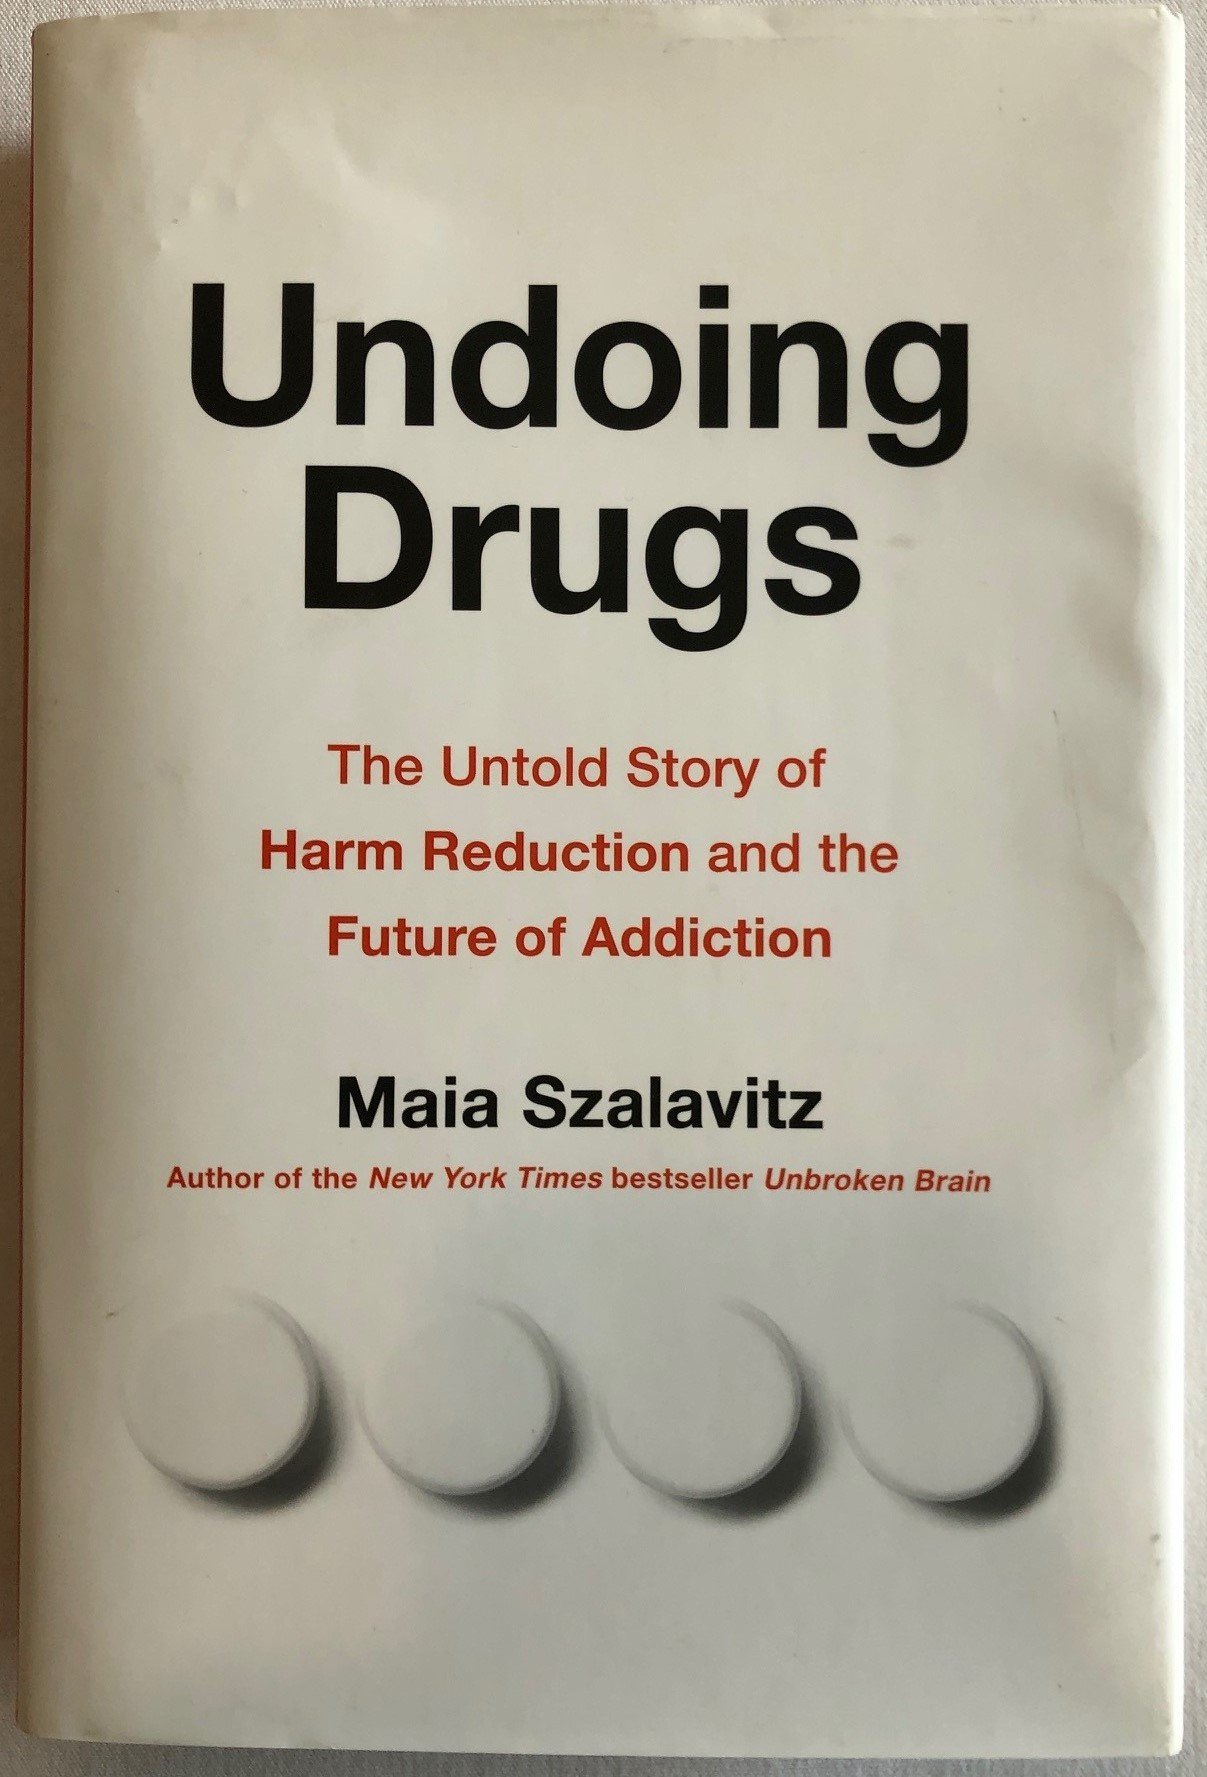 Book Review – Undoing Drugs: The Untold Story of Harm Reduction and the Future of Addiction by Maia Szalavitz